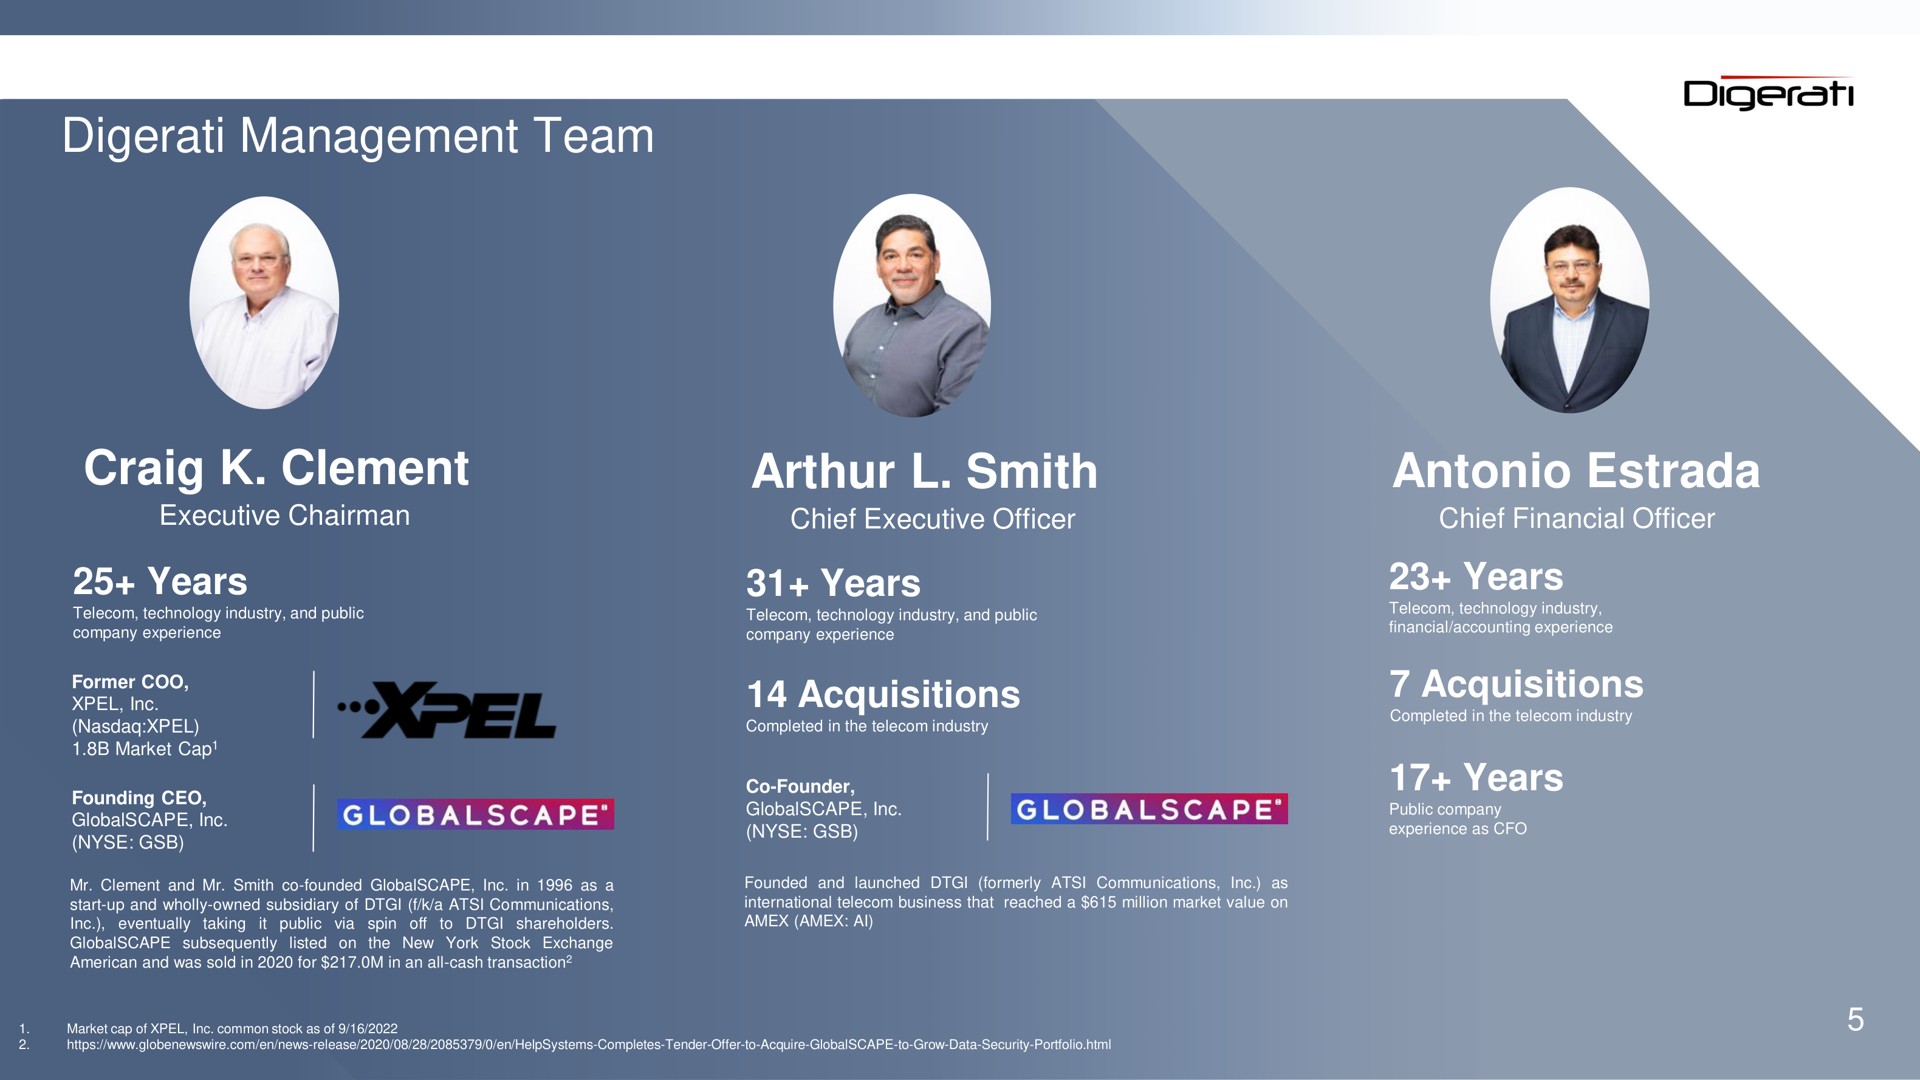 management team clement years smith years acquisitions years acquisitions years | Digerati